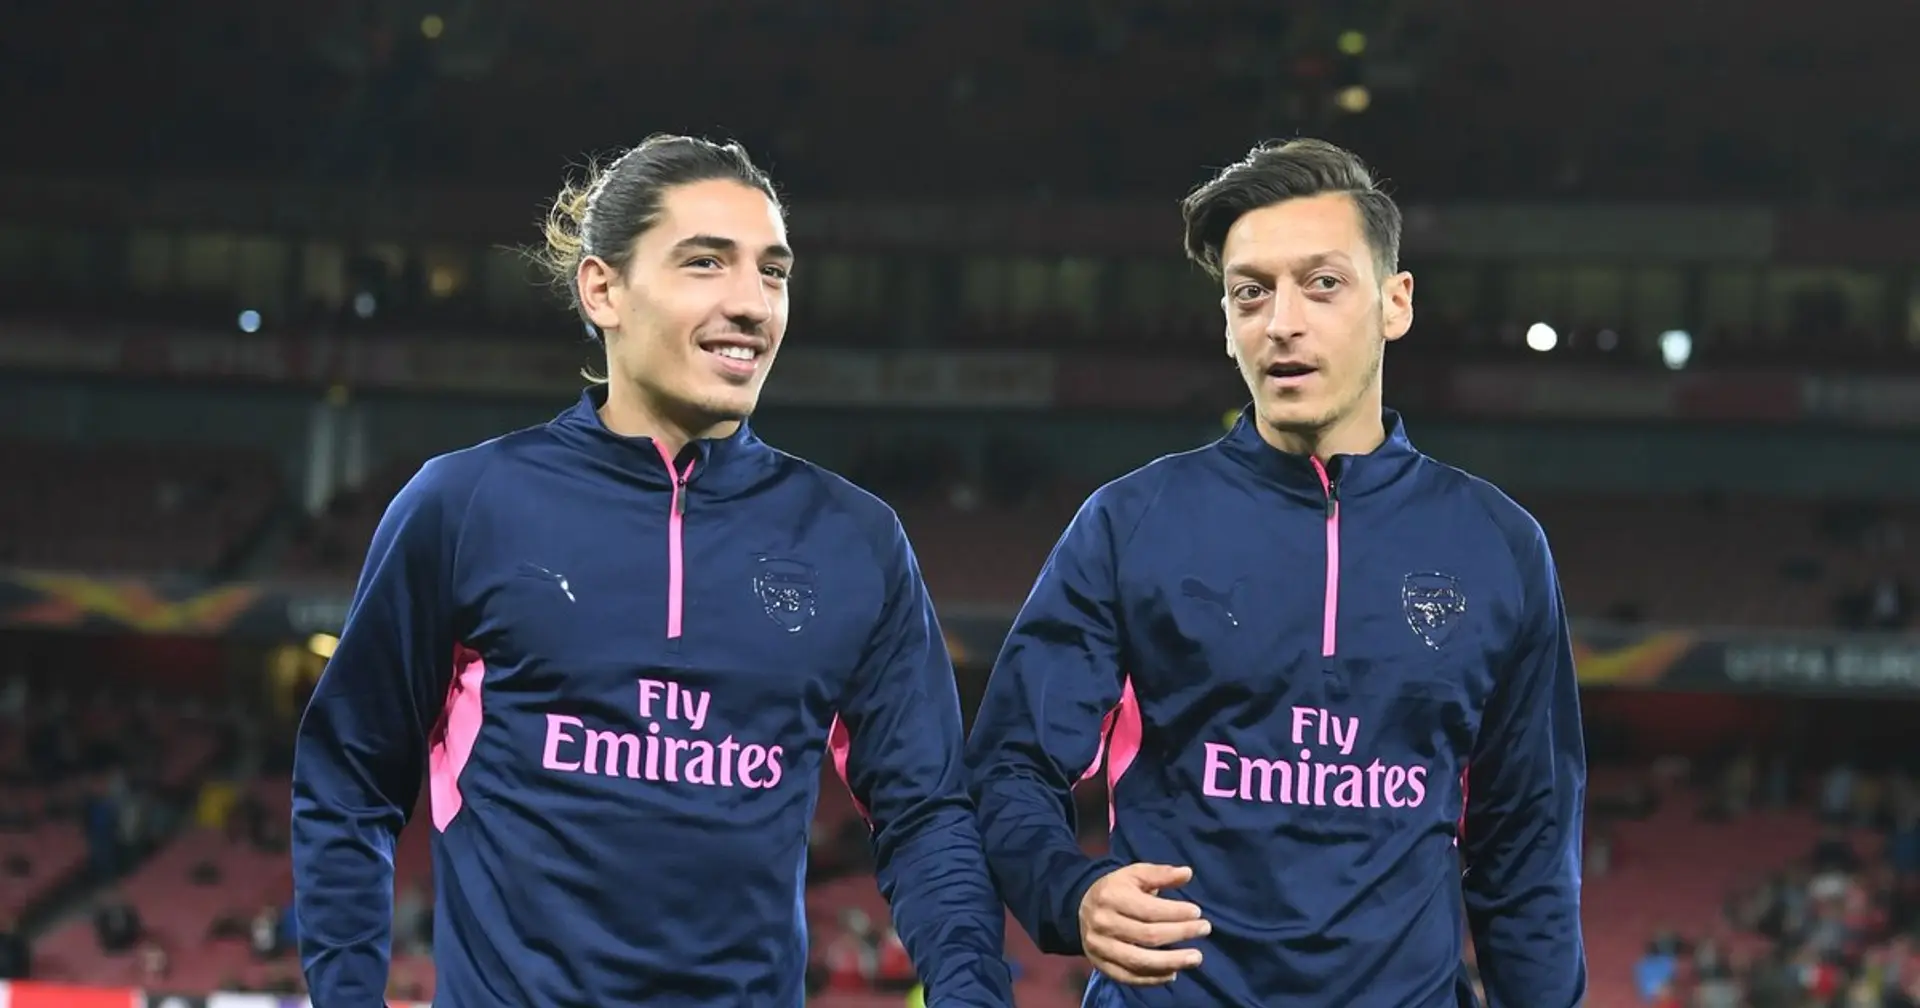 'If you are an athlete, you have social responsibility': Flamini backs Ozil's, Bellerin's activism